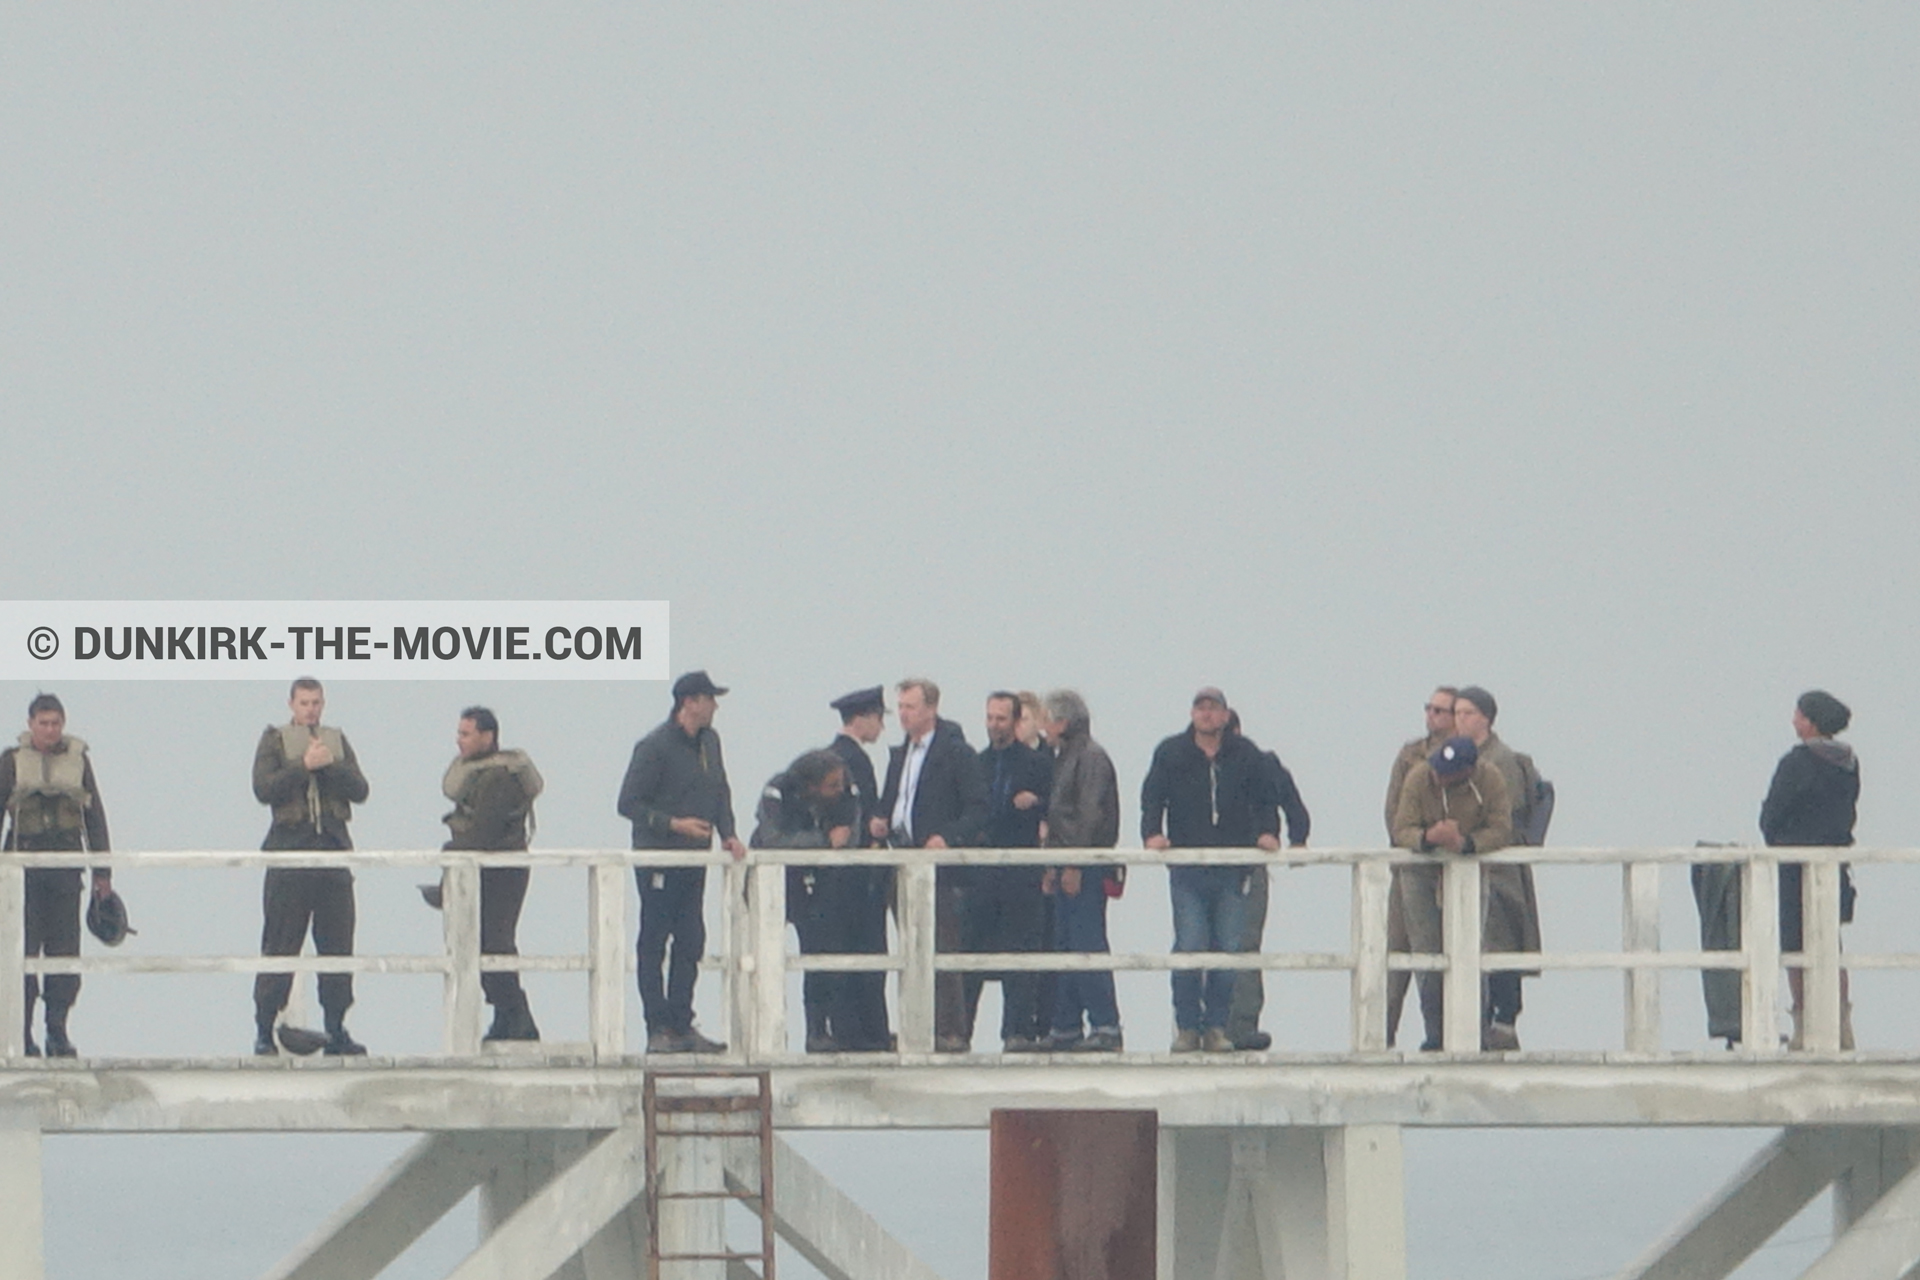 Picture with grey sky, supernumeraries, Hoyte van Hoytema, EST pier, Christopher Nolan, technical team, Nilo Otero,  from behind the scene of the Dunkirk movie by Nolan